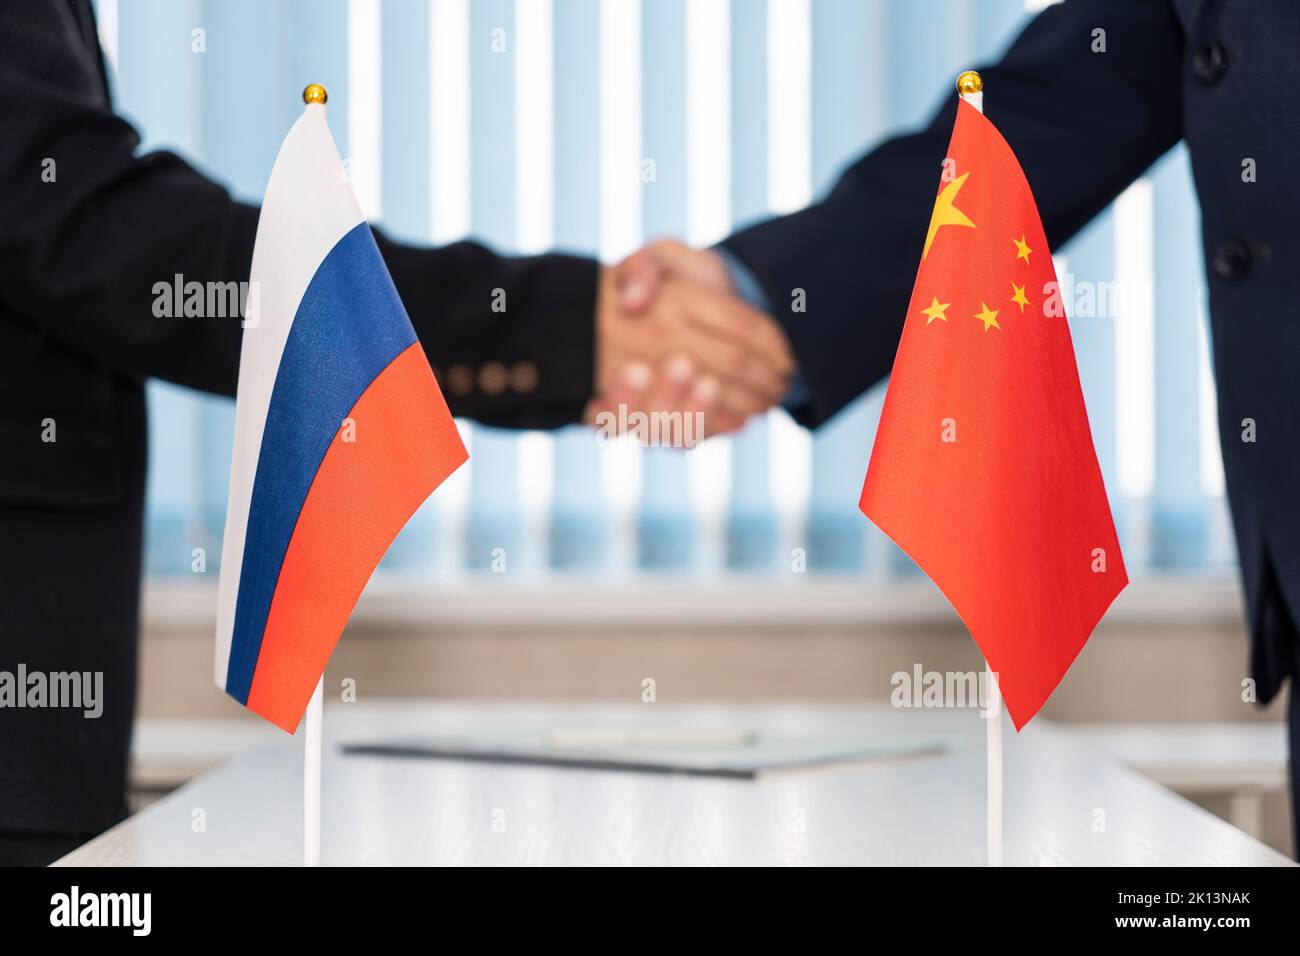 Political flags of russia and chinese on table in international negotiation room. concept of negotiations, collaboration and cooperation of countries. Stock Photo